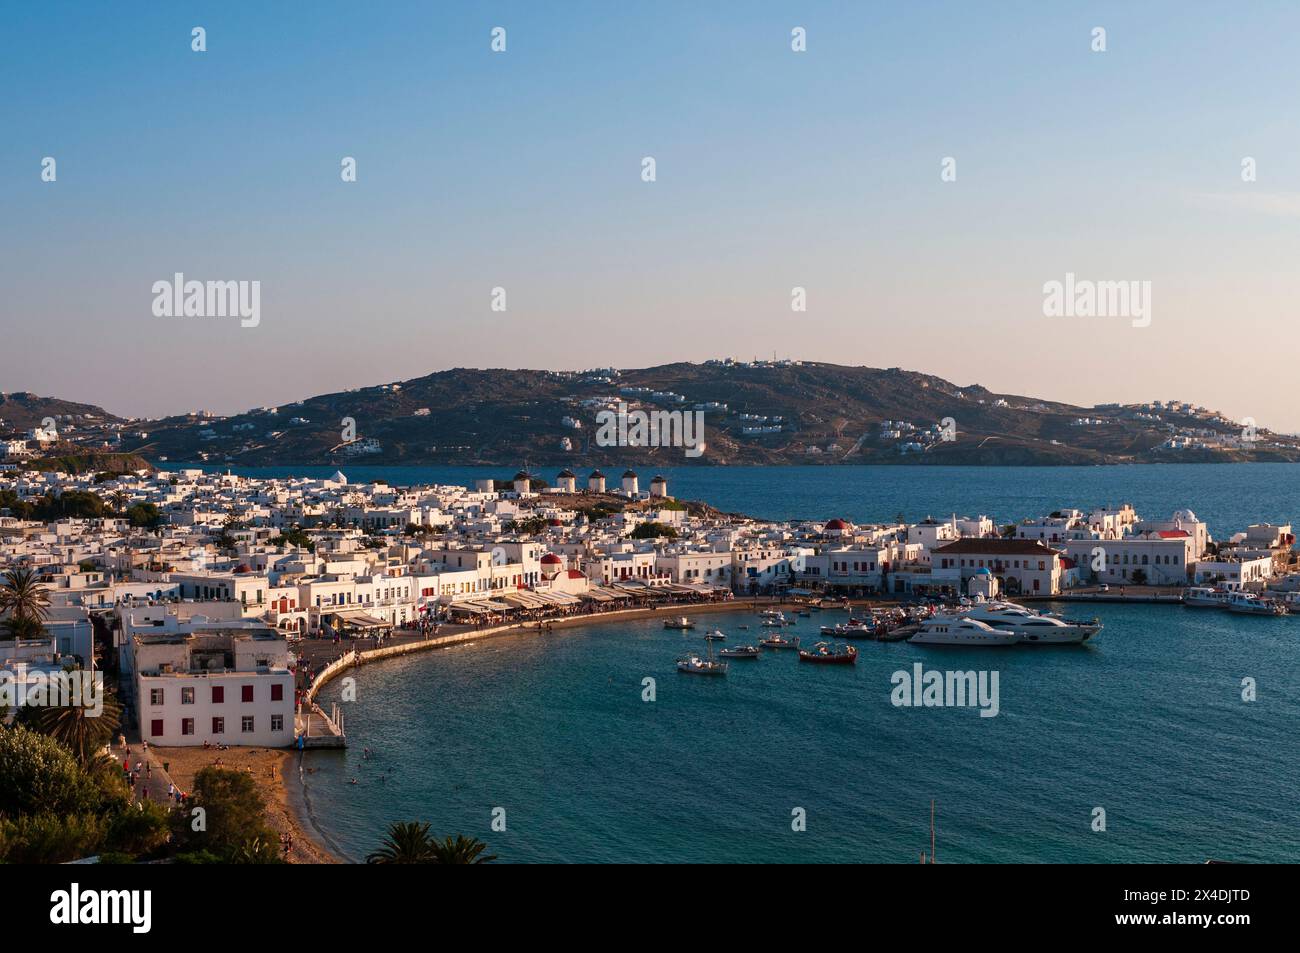 A scenic view of Chora and the nearby sea at sunset. Chora, Mykonos Island, Cyclades Islands, Greece. Stock Photo